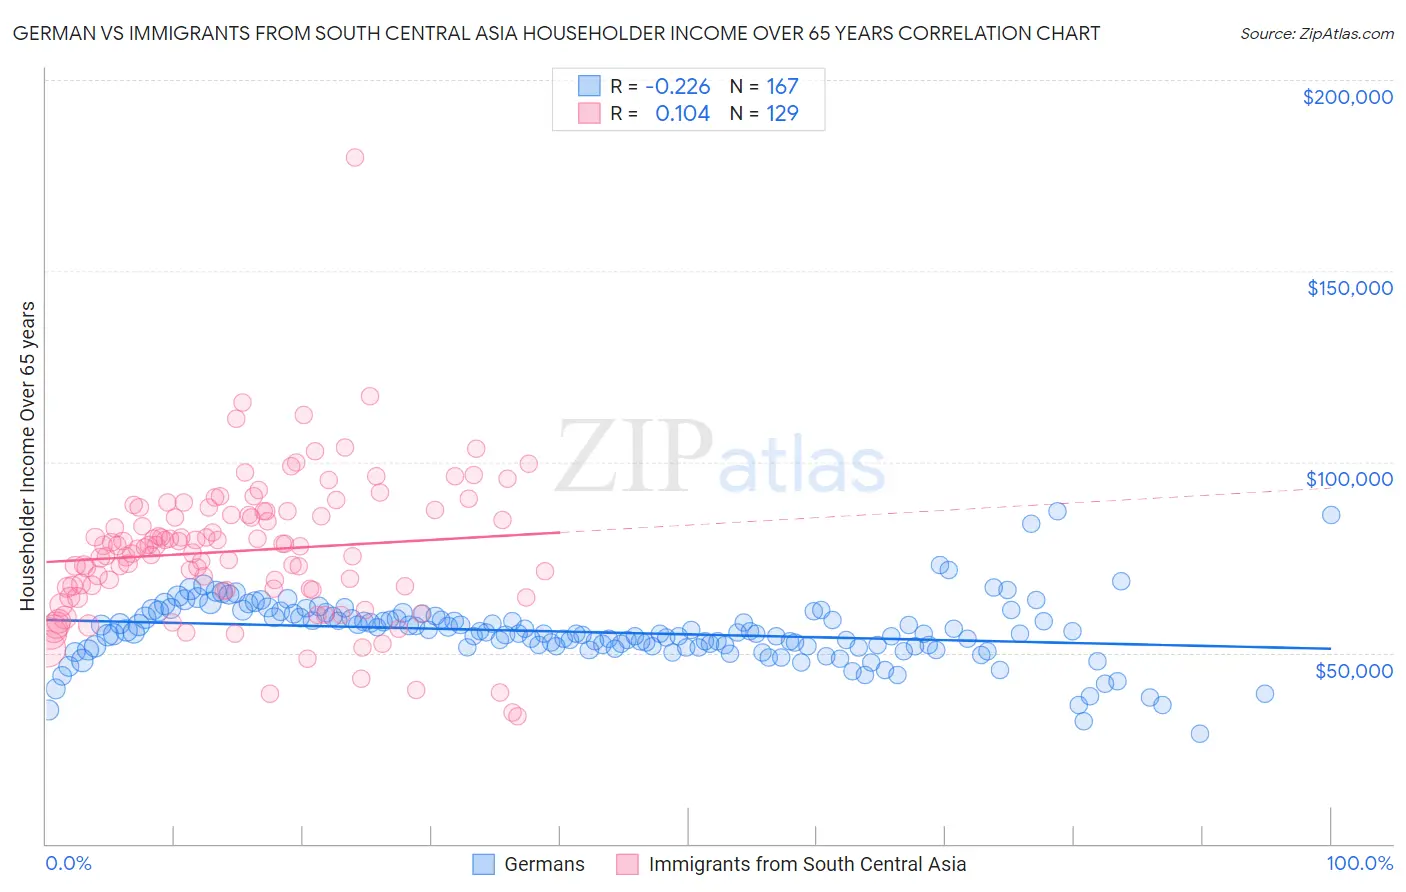 German vs Immigrants from South Central Asia Householder Income Over 65 years